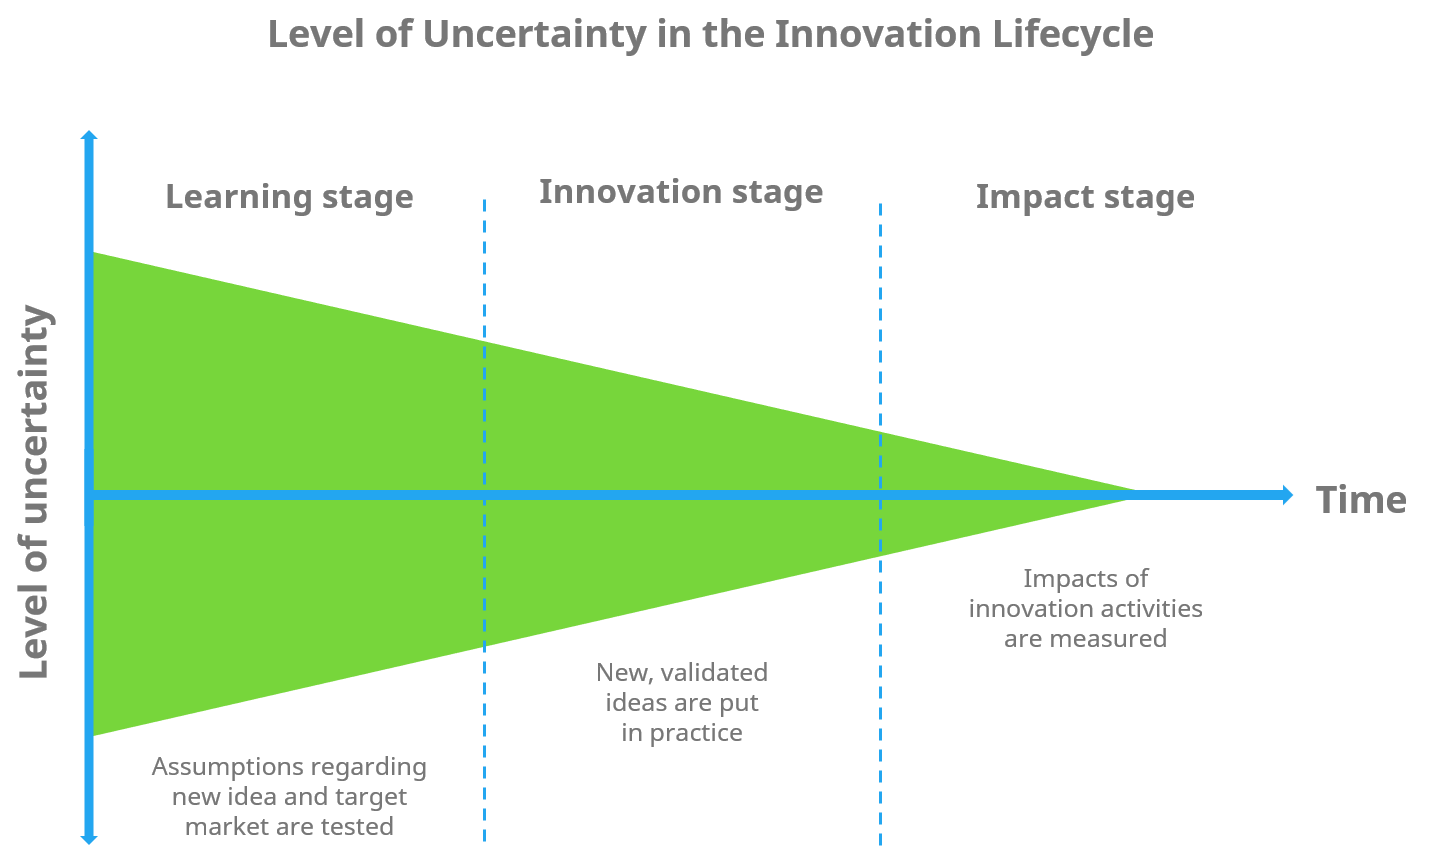 Level of uncertainty in the innovation lifecycle